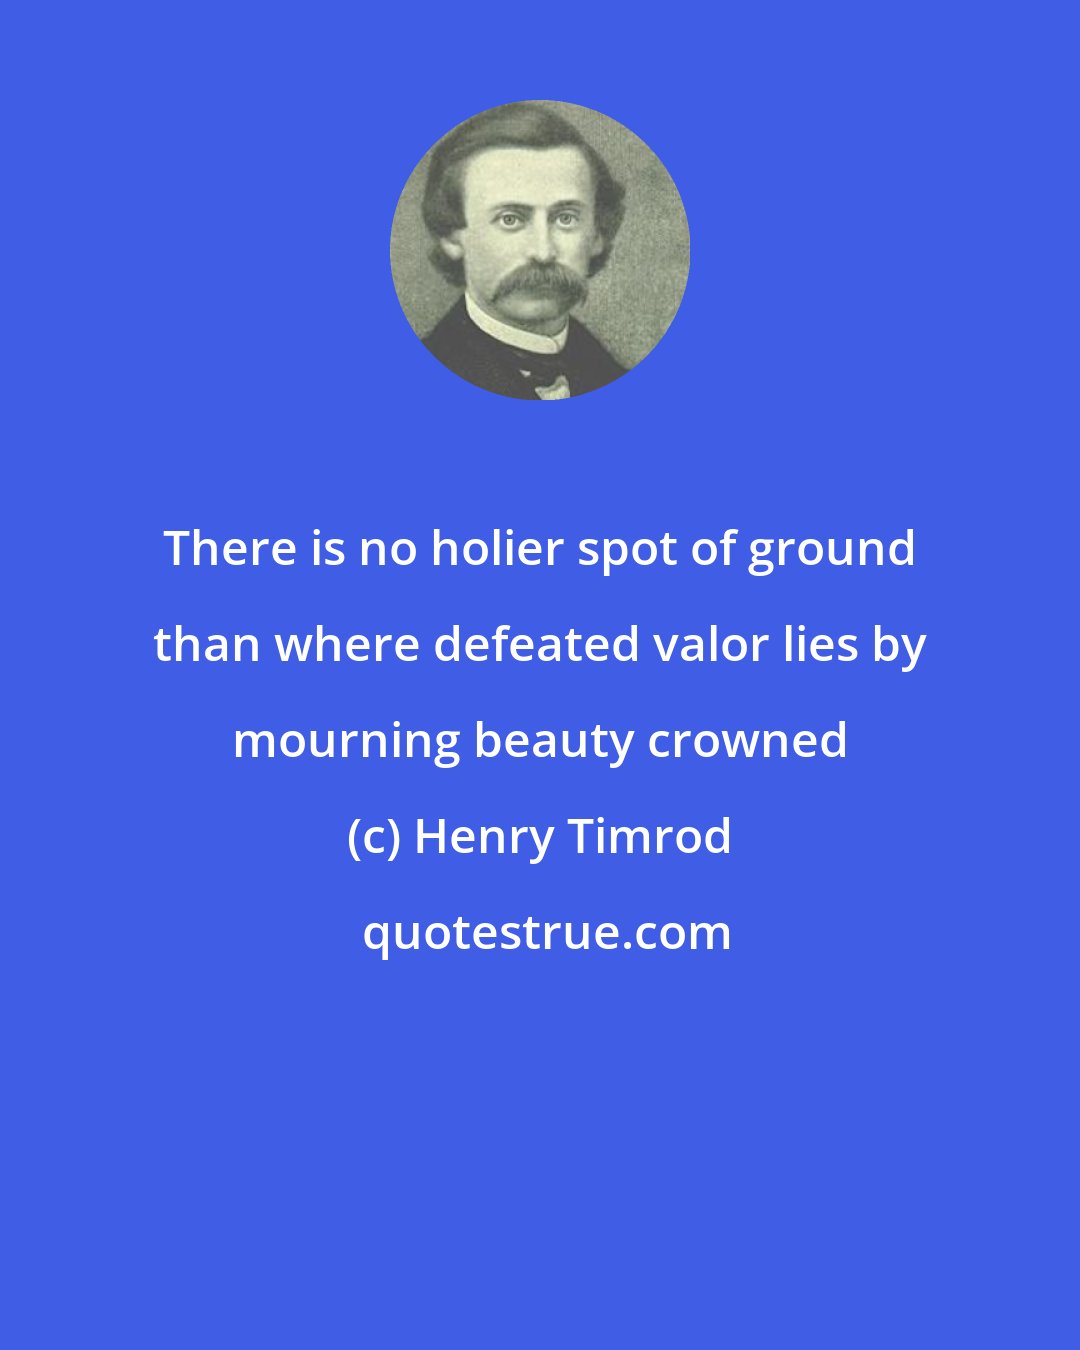 Henry Timrod: There is no holier spot of ground than where defeated valor lies by mourning beauty crowned